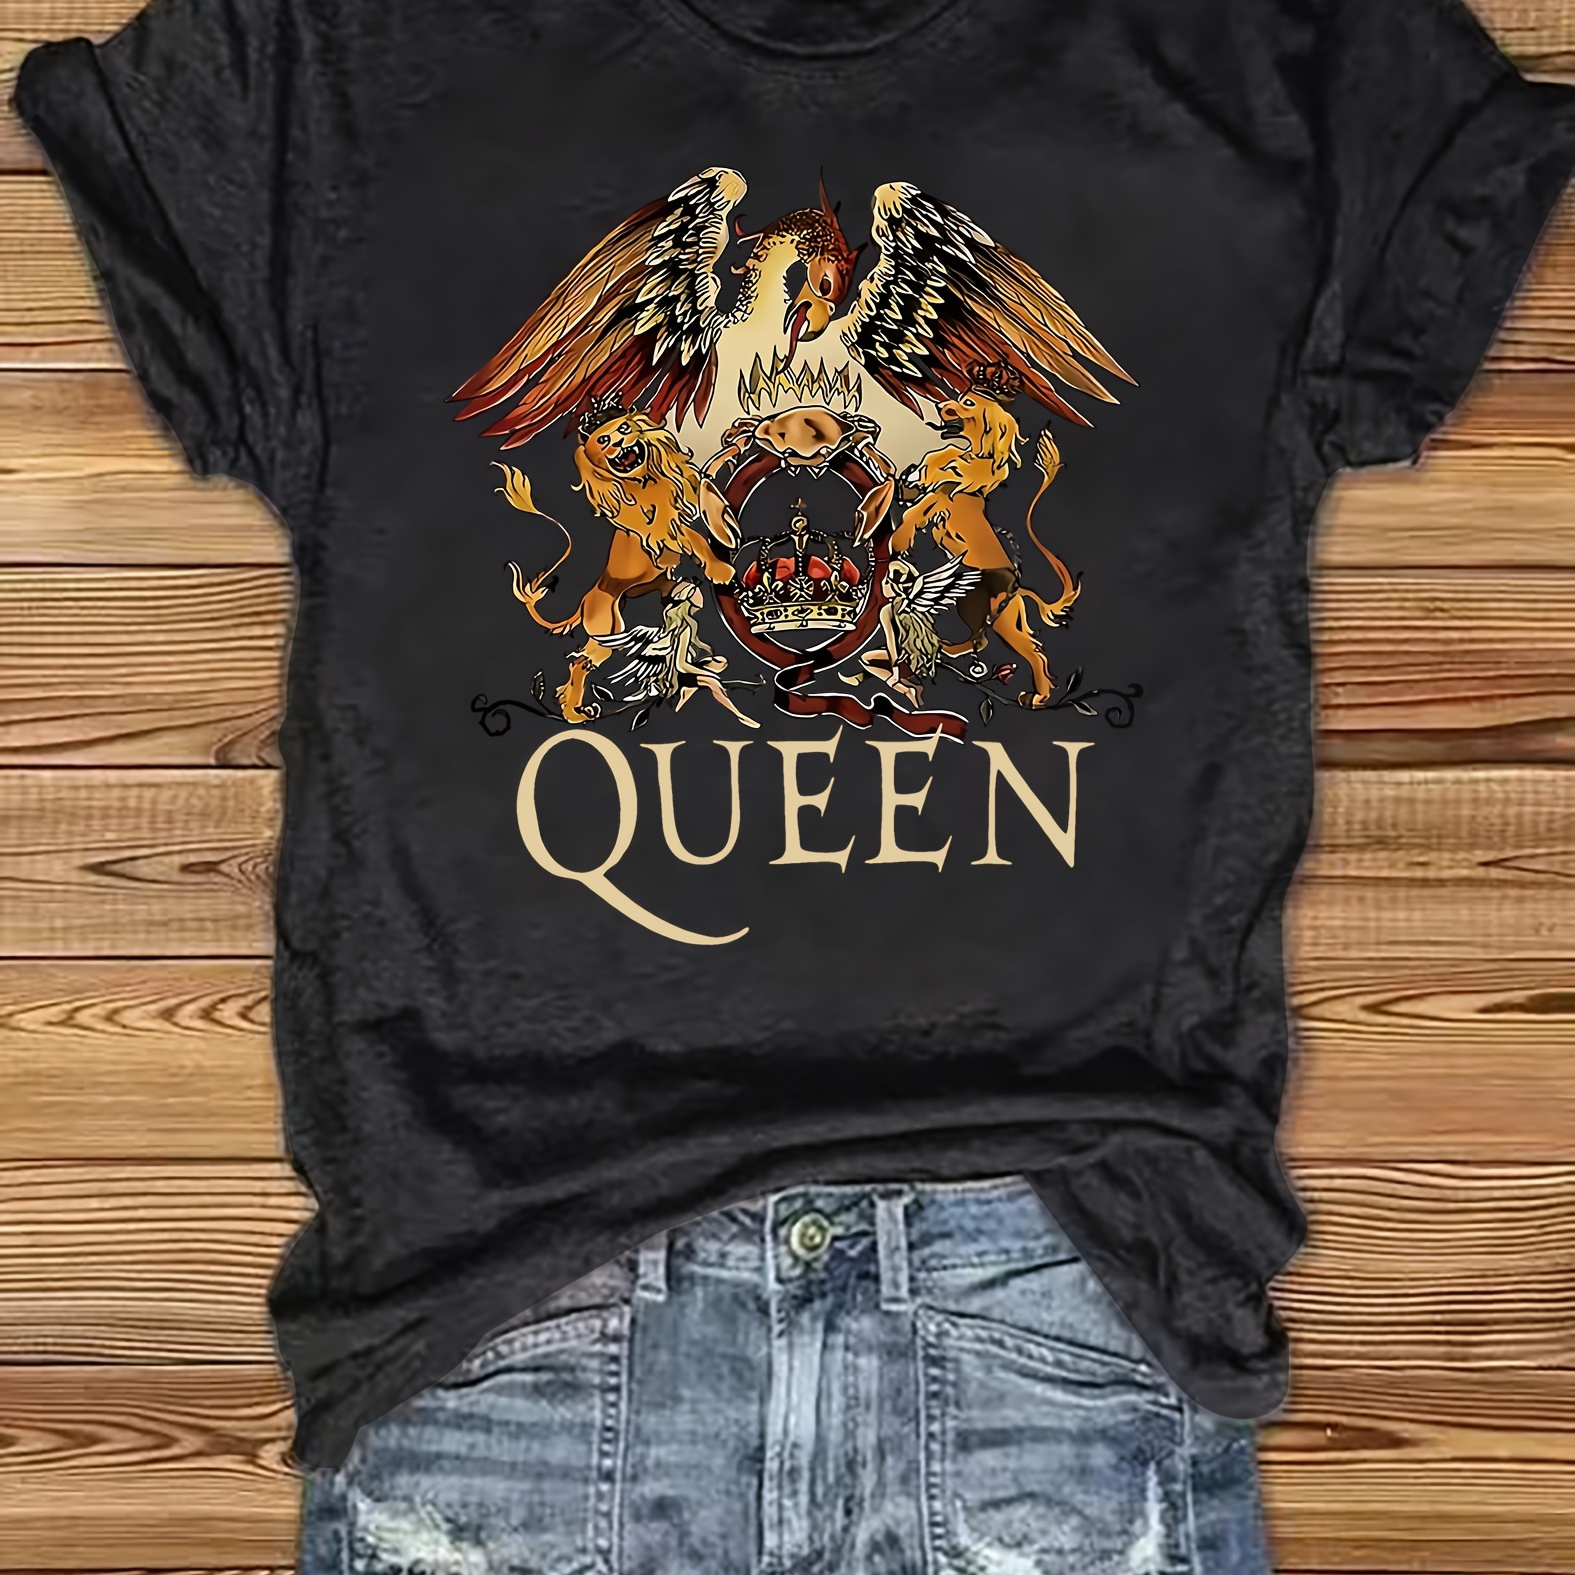 

Vintage Graphic & Queen Letter Print T-shirt, Crew Neck Short Sleeve T-shirt For Spring & Summer, Women's Clothing